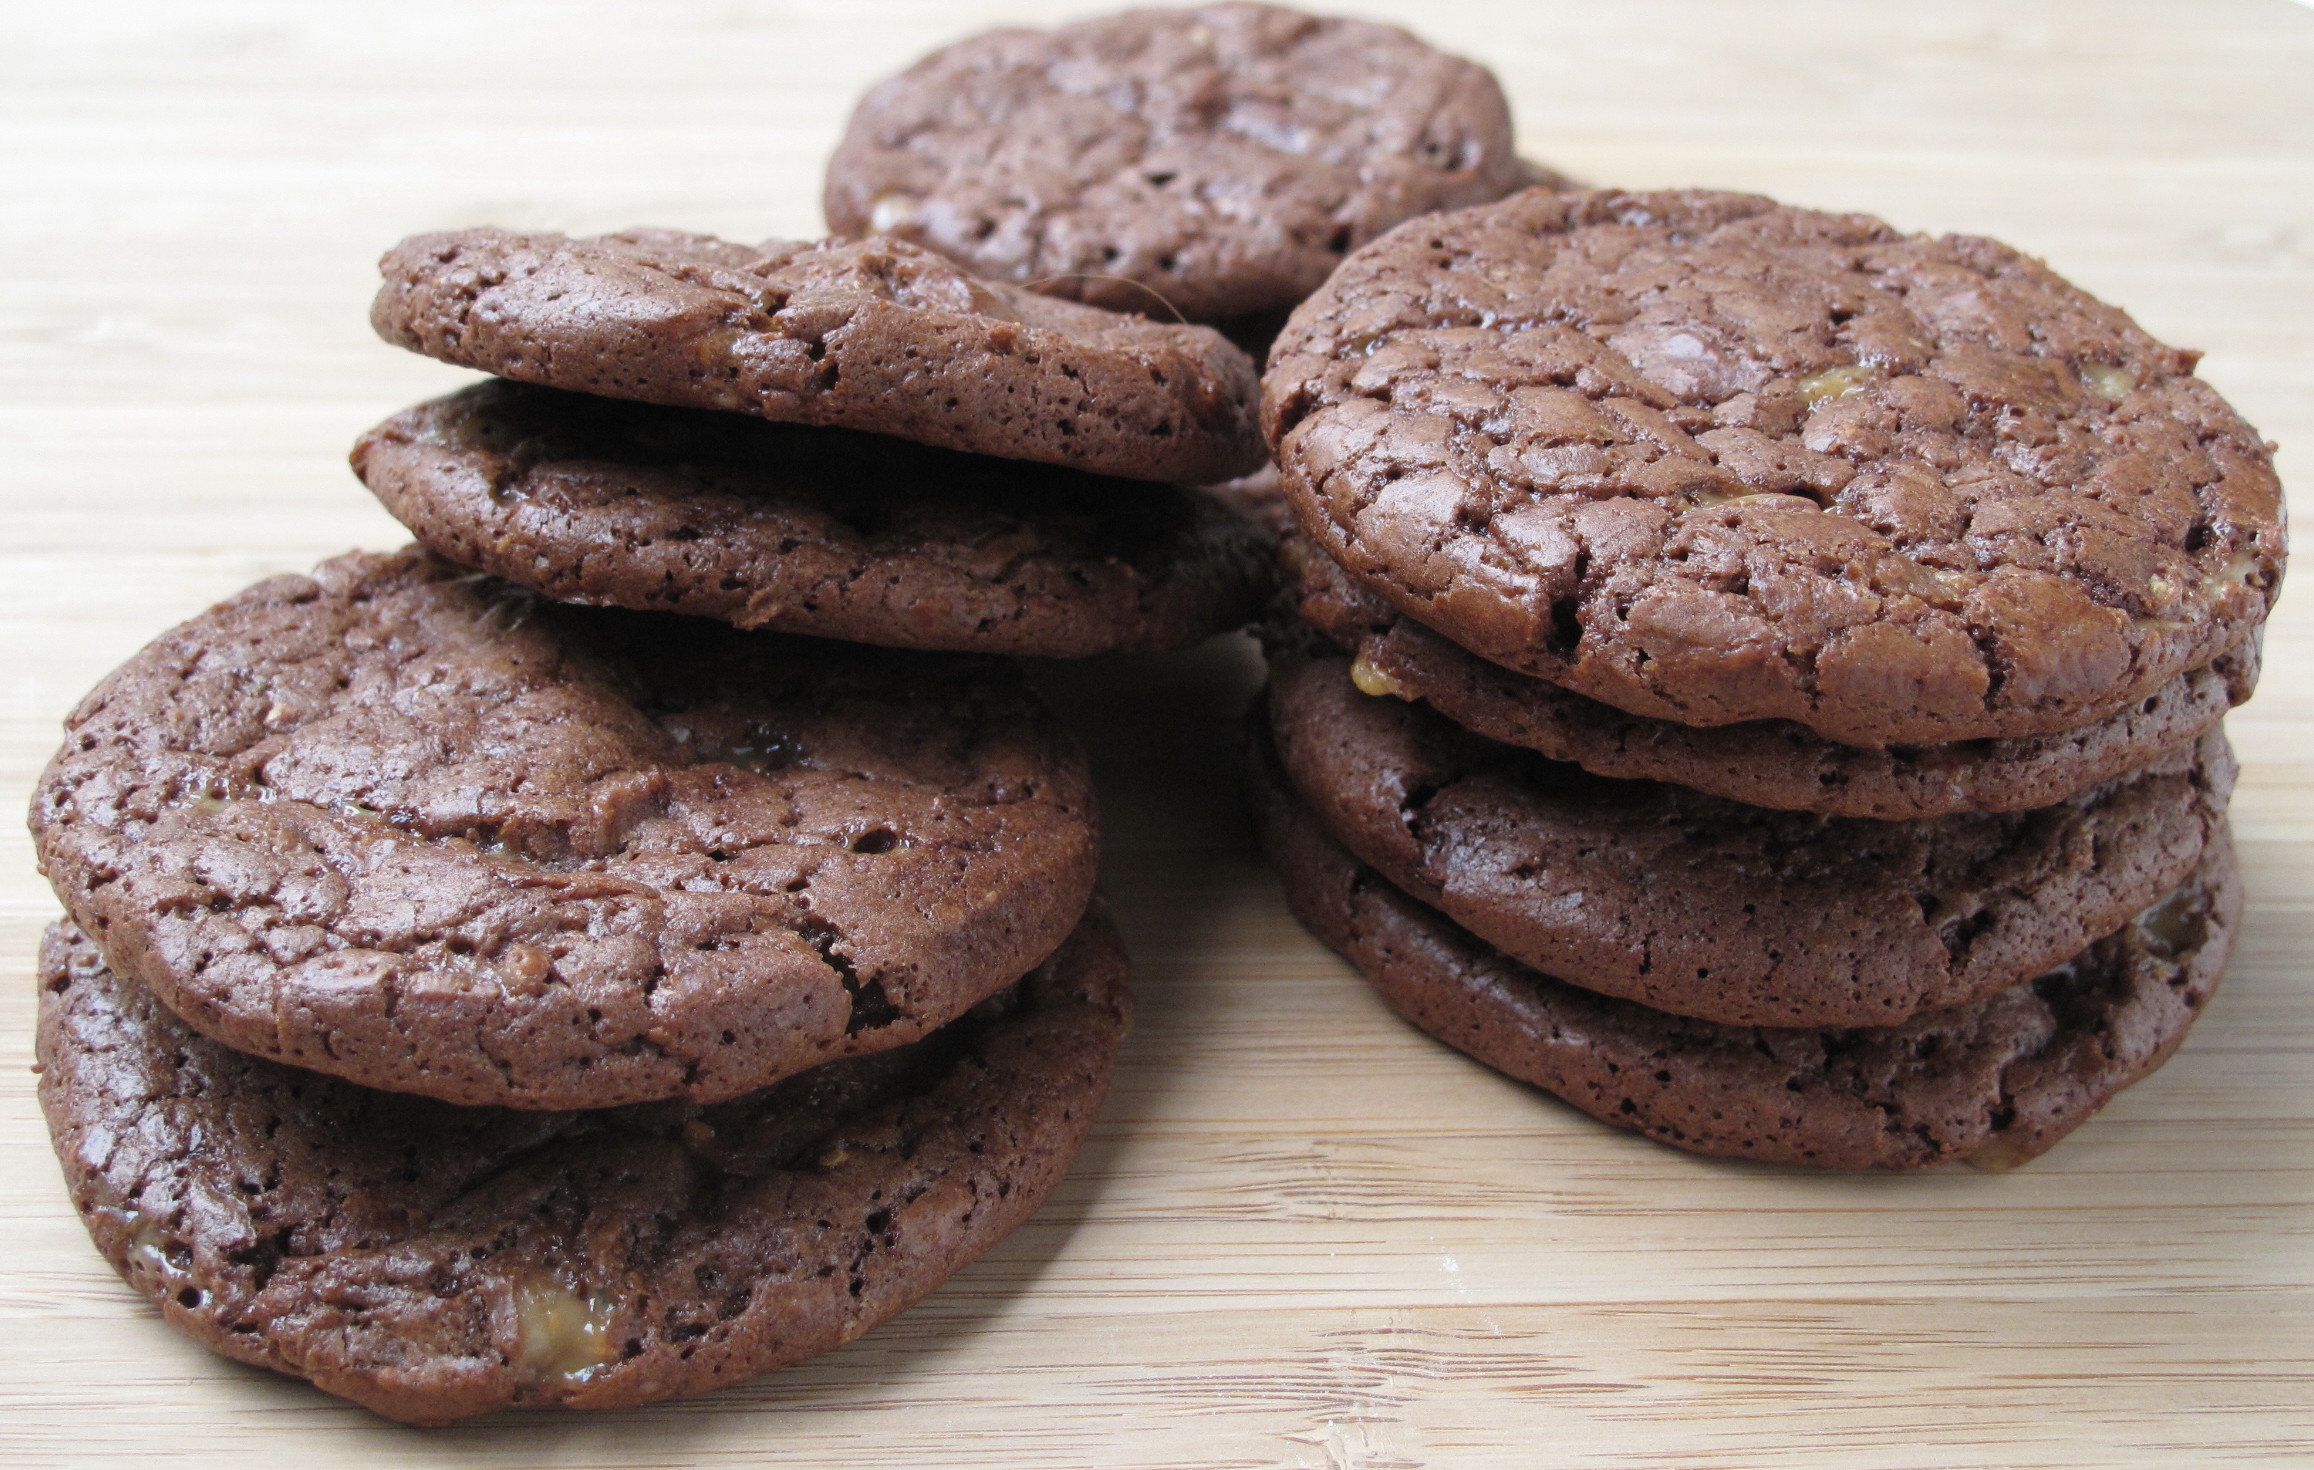 Chocolate Toffee Cookies piled on brown wood cutting board.